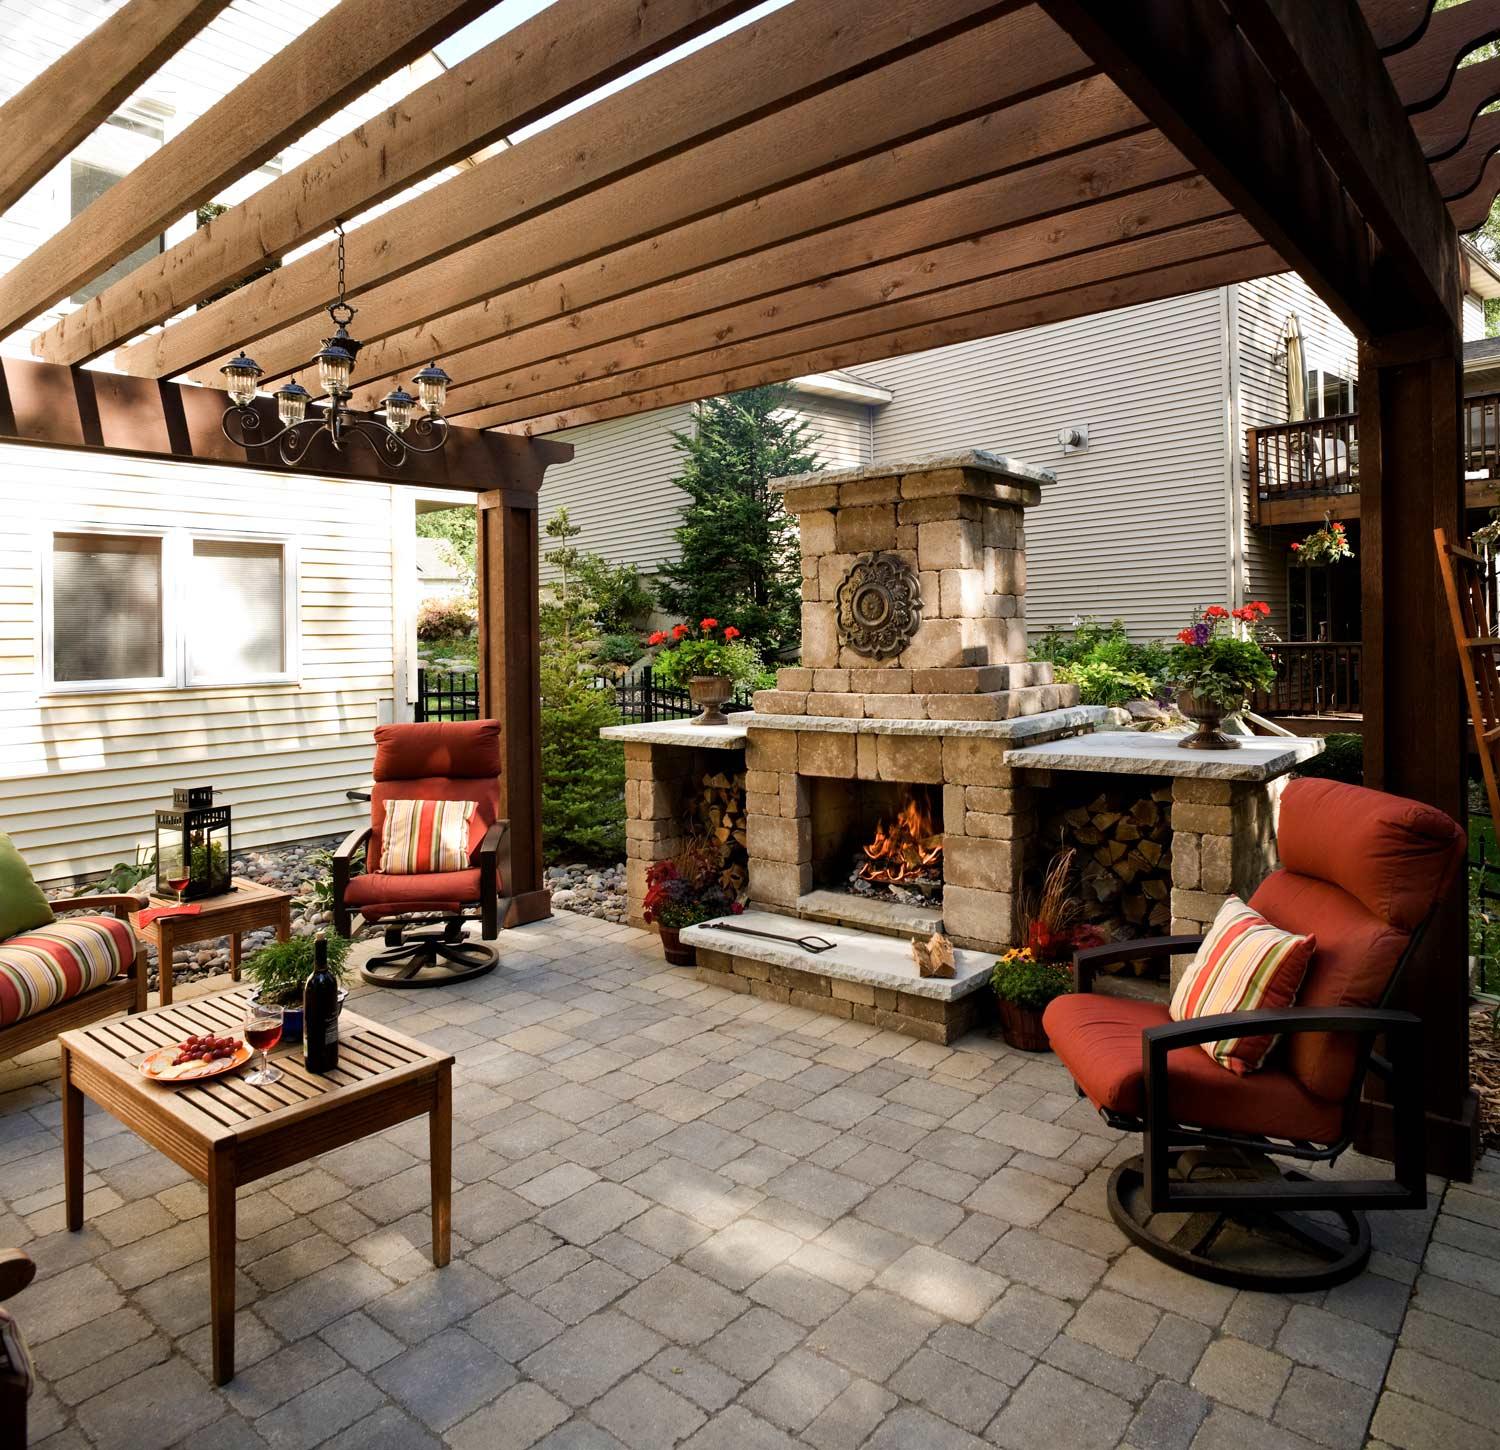 Pergola covers the entire patio in this small backyard landscape in savage